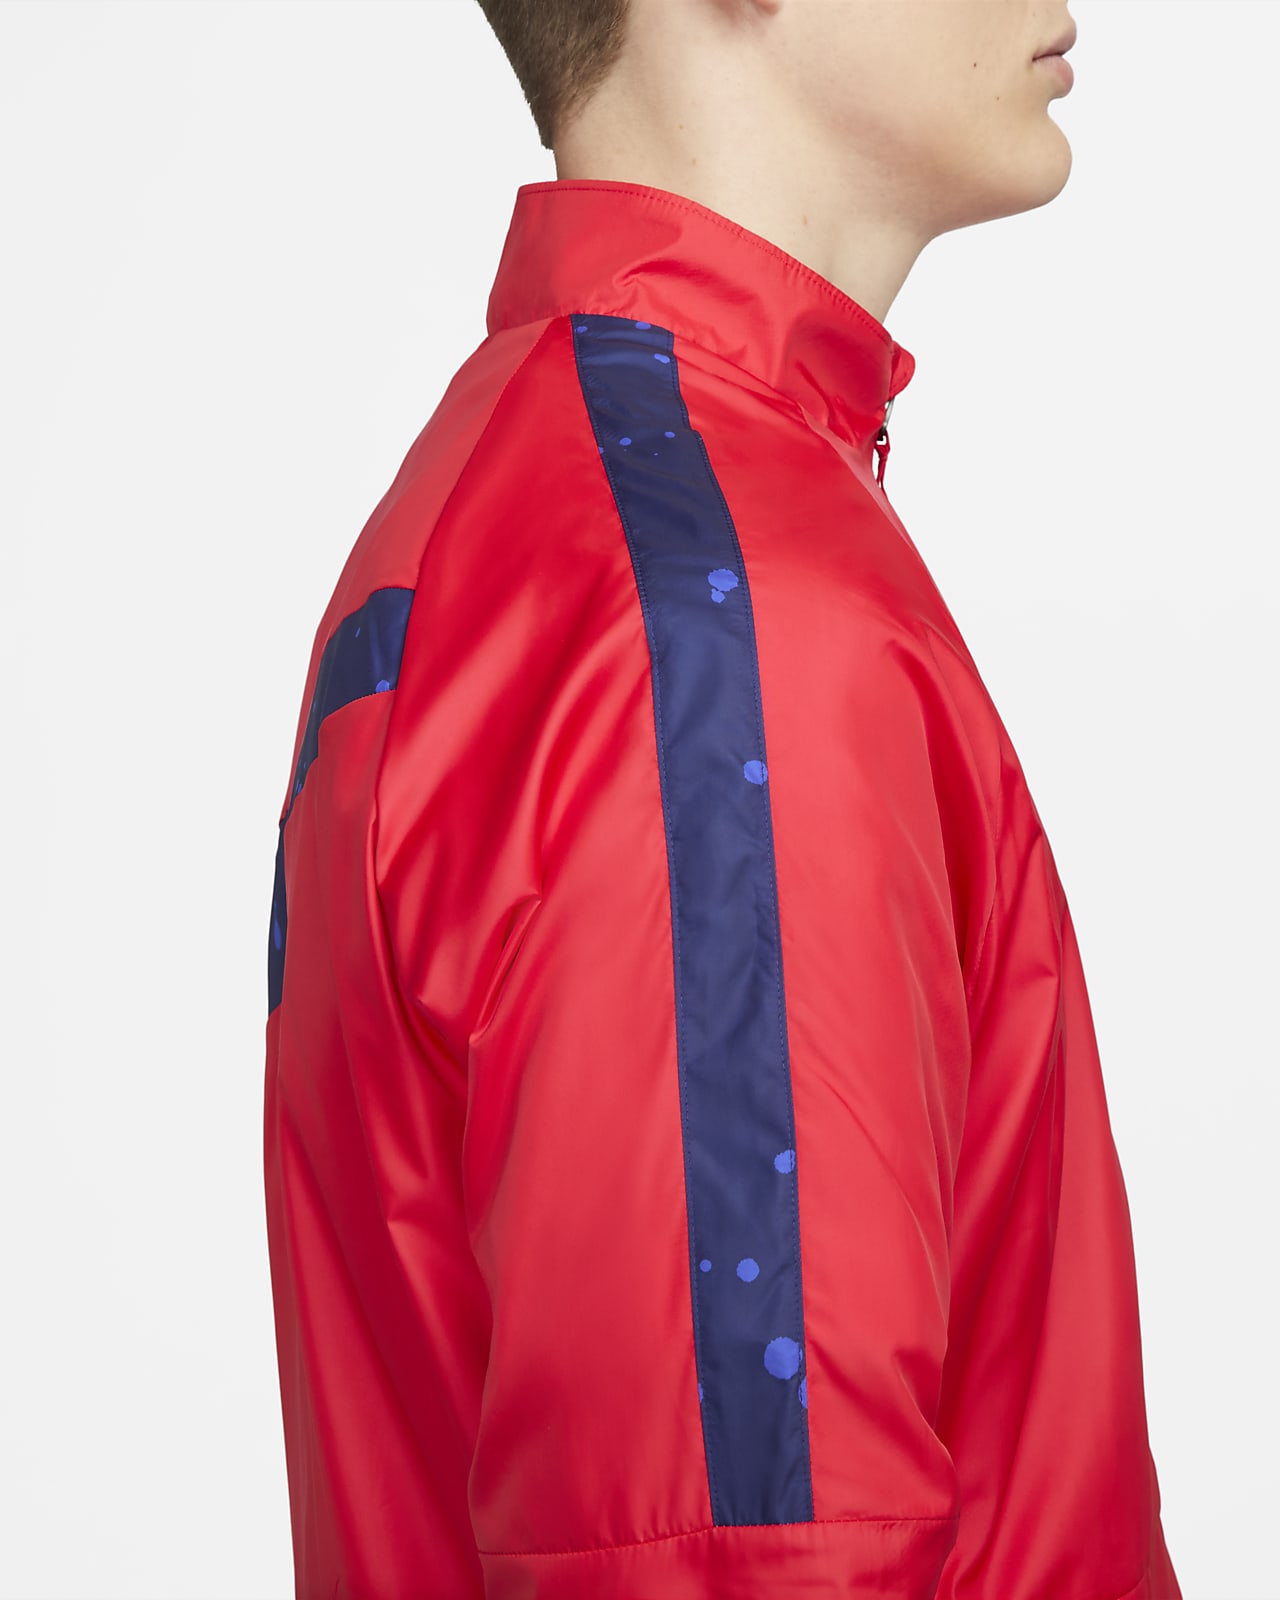 Nike U.S. AWF Women's Soccer Jacket, Speed Red/Loyal Blue, Small :  : Clothing, Shoes & Accessories